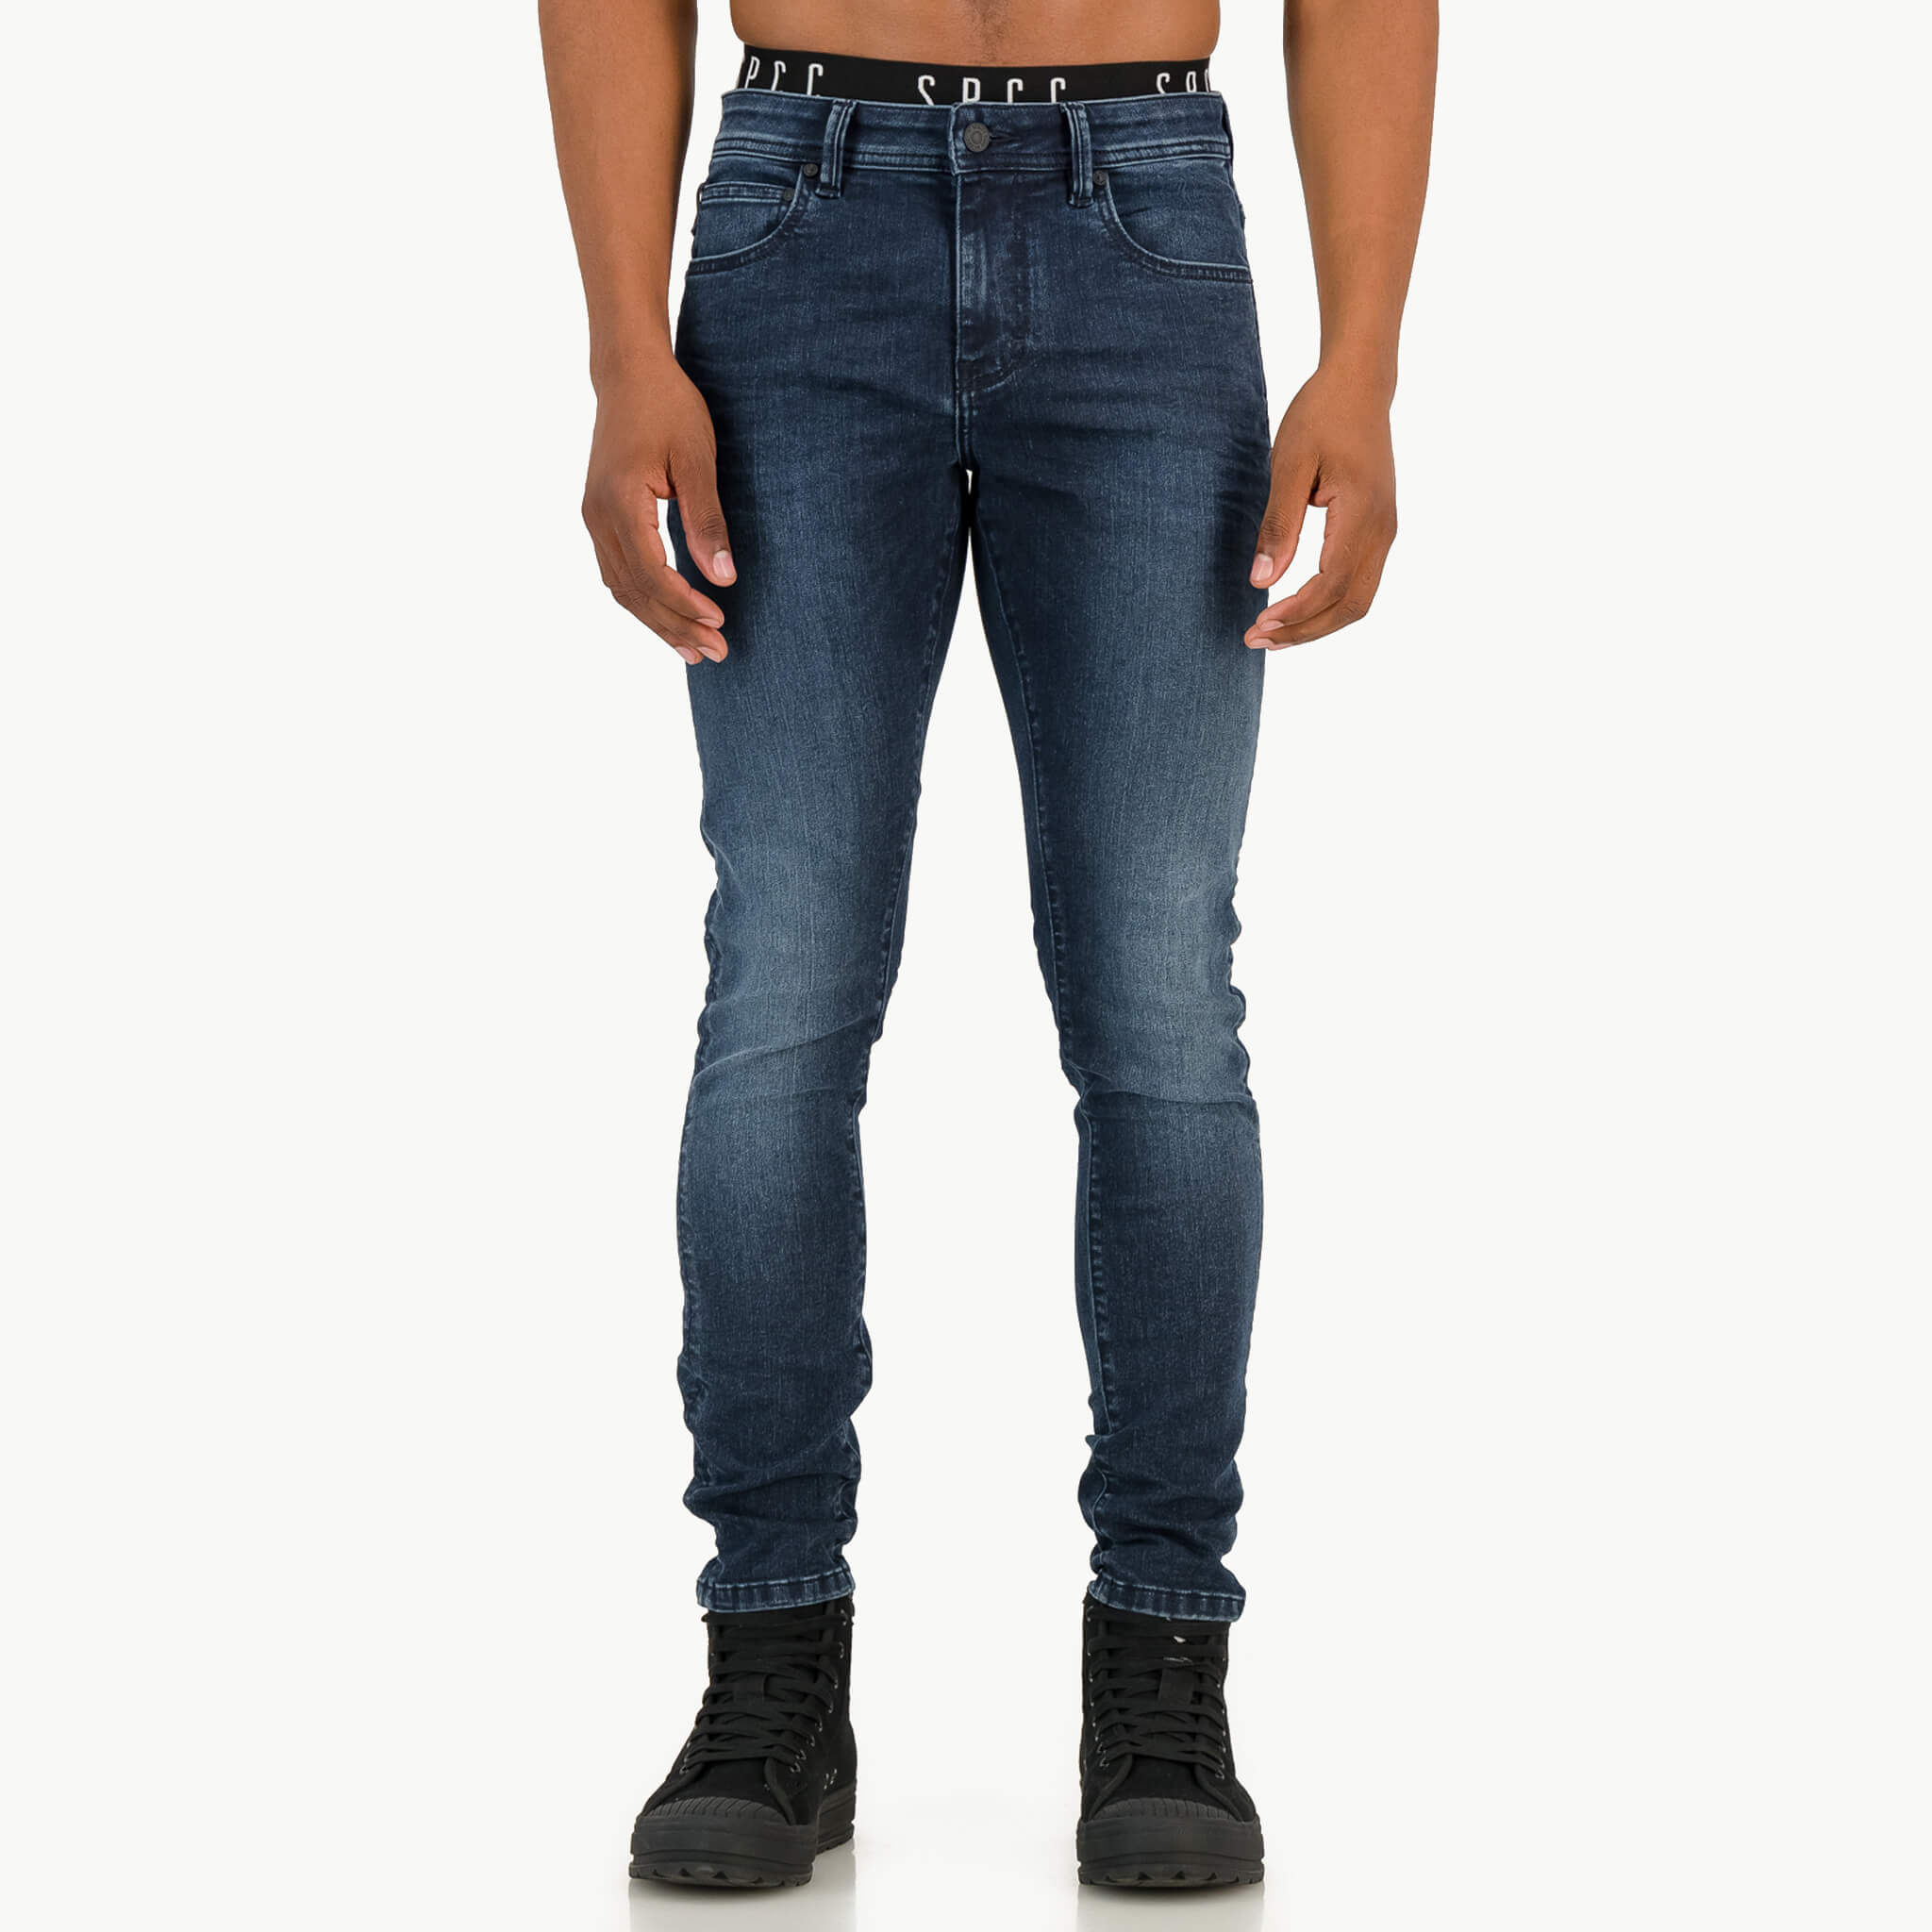 Mid Blue Jeans (Skinny Fit)